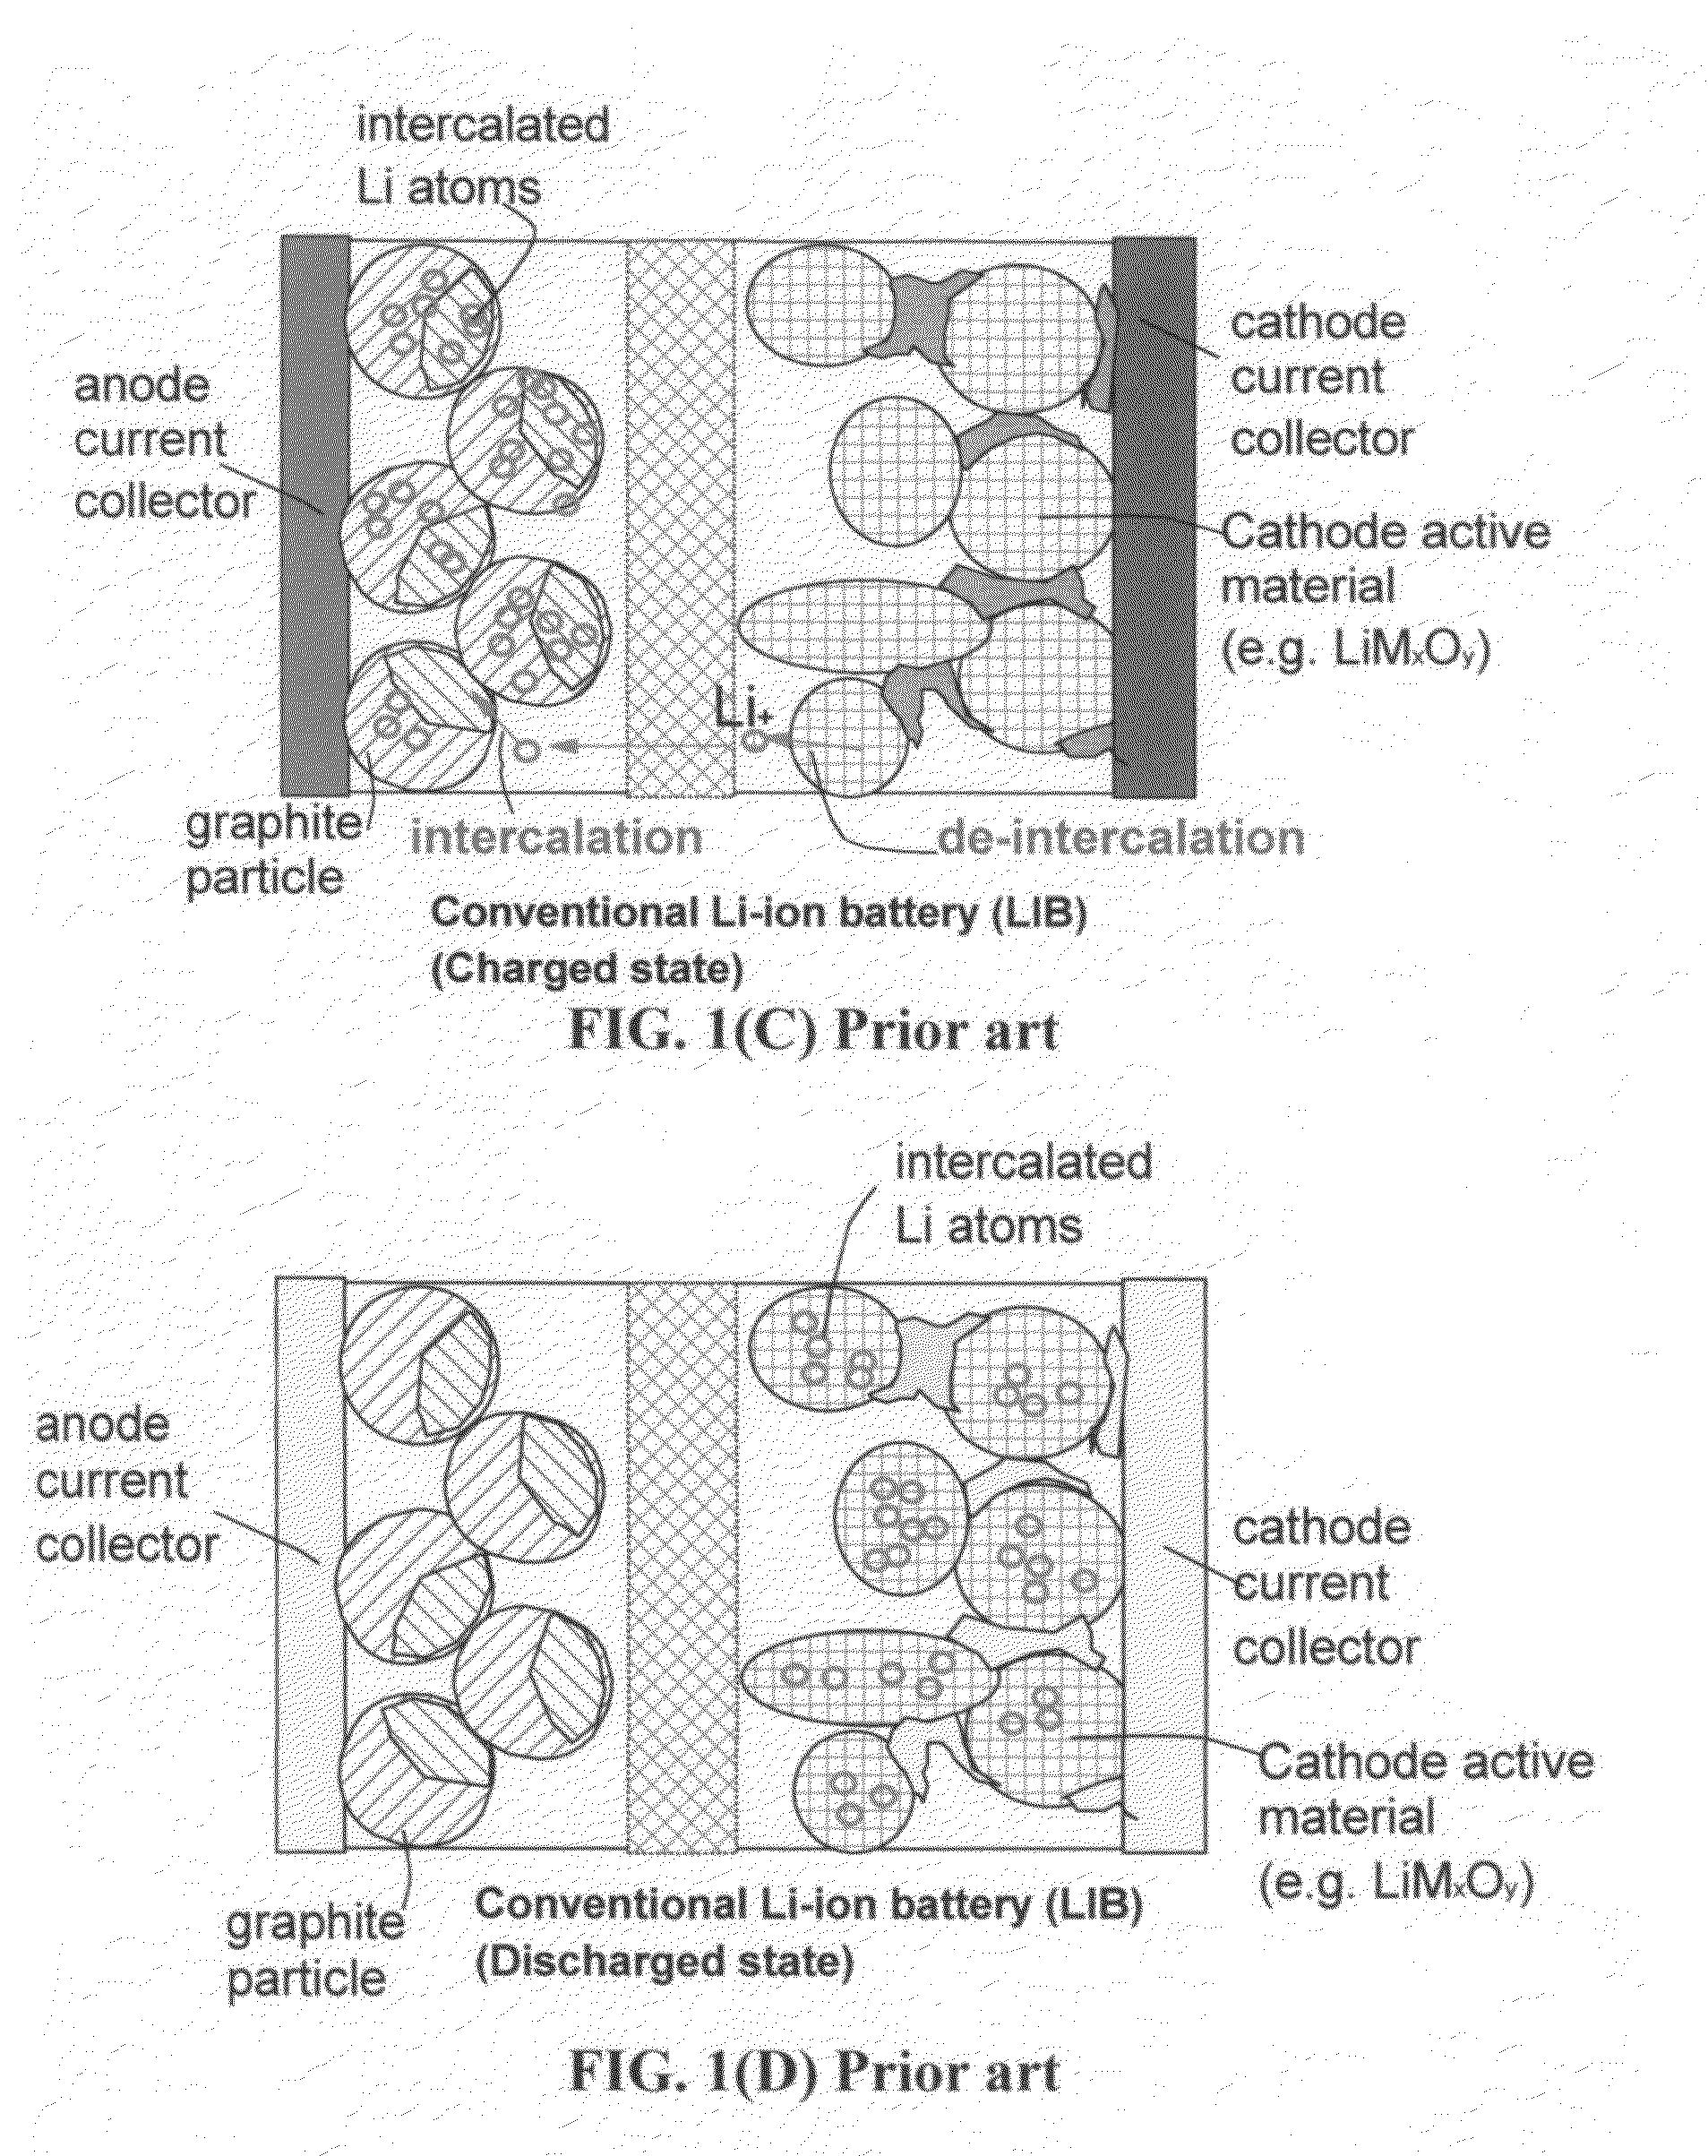 Surface-mediated cell-powered portable computing devices and methods of operating same